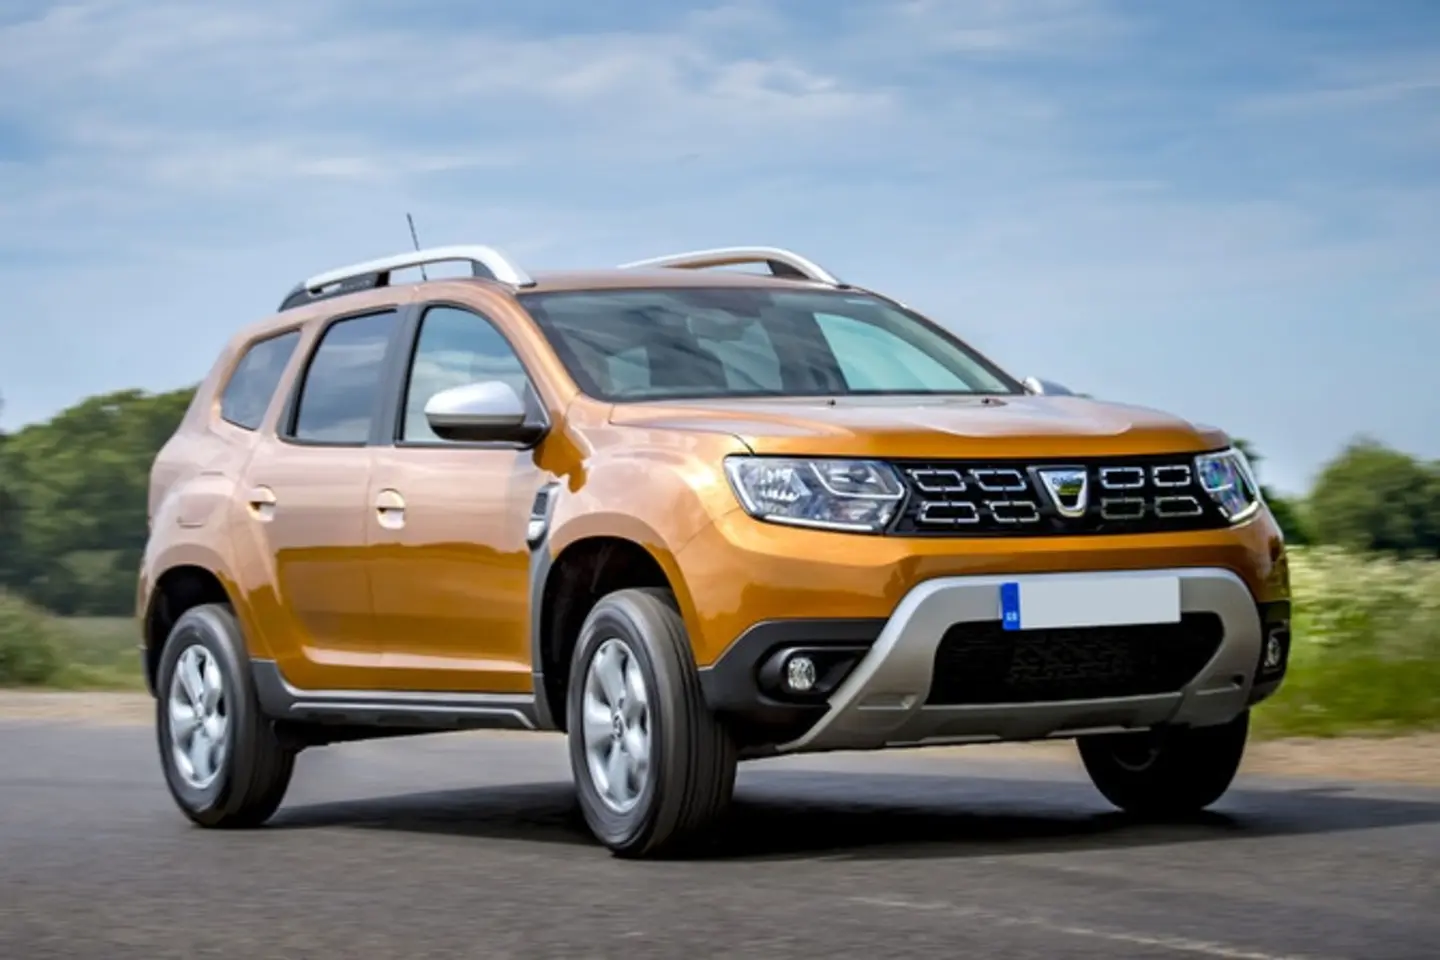 The exterior of a yellow Dacia Duster